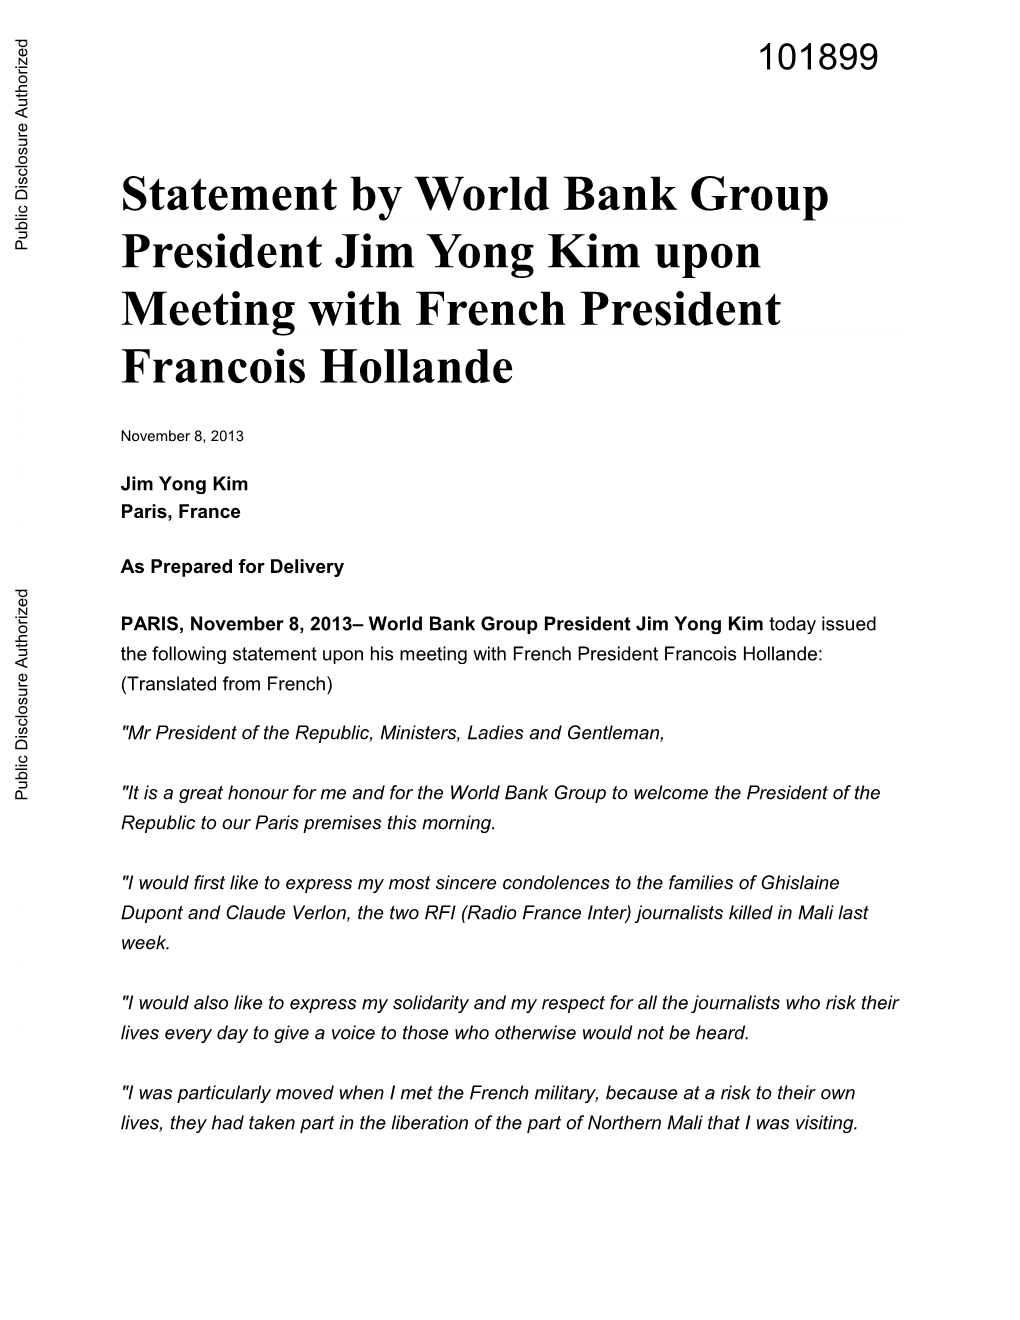 Statement by World Bank Group President